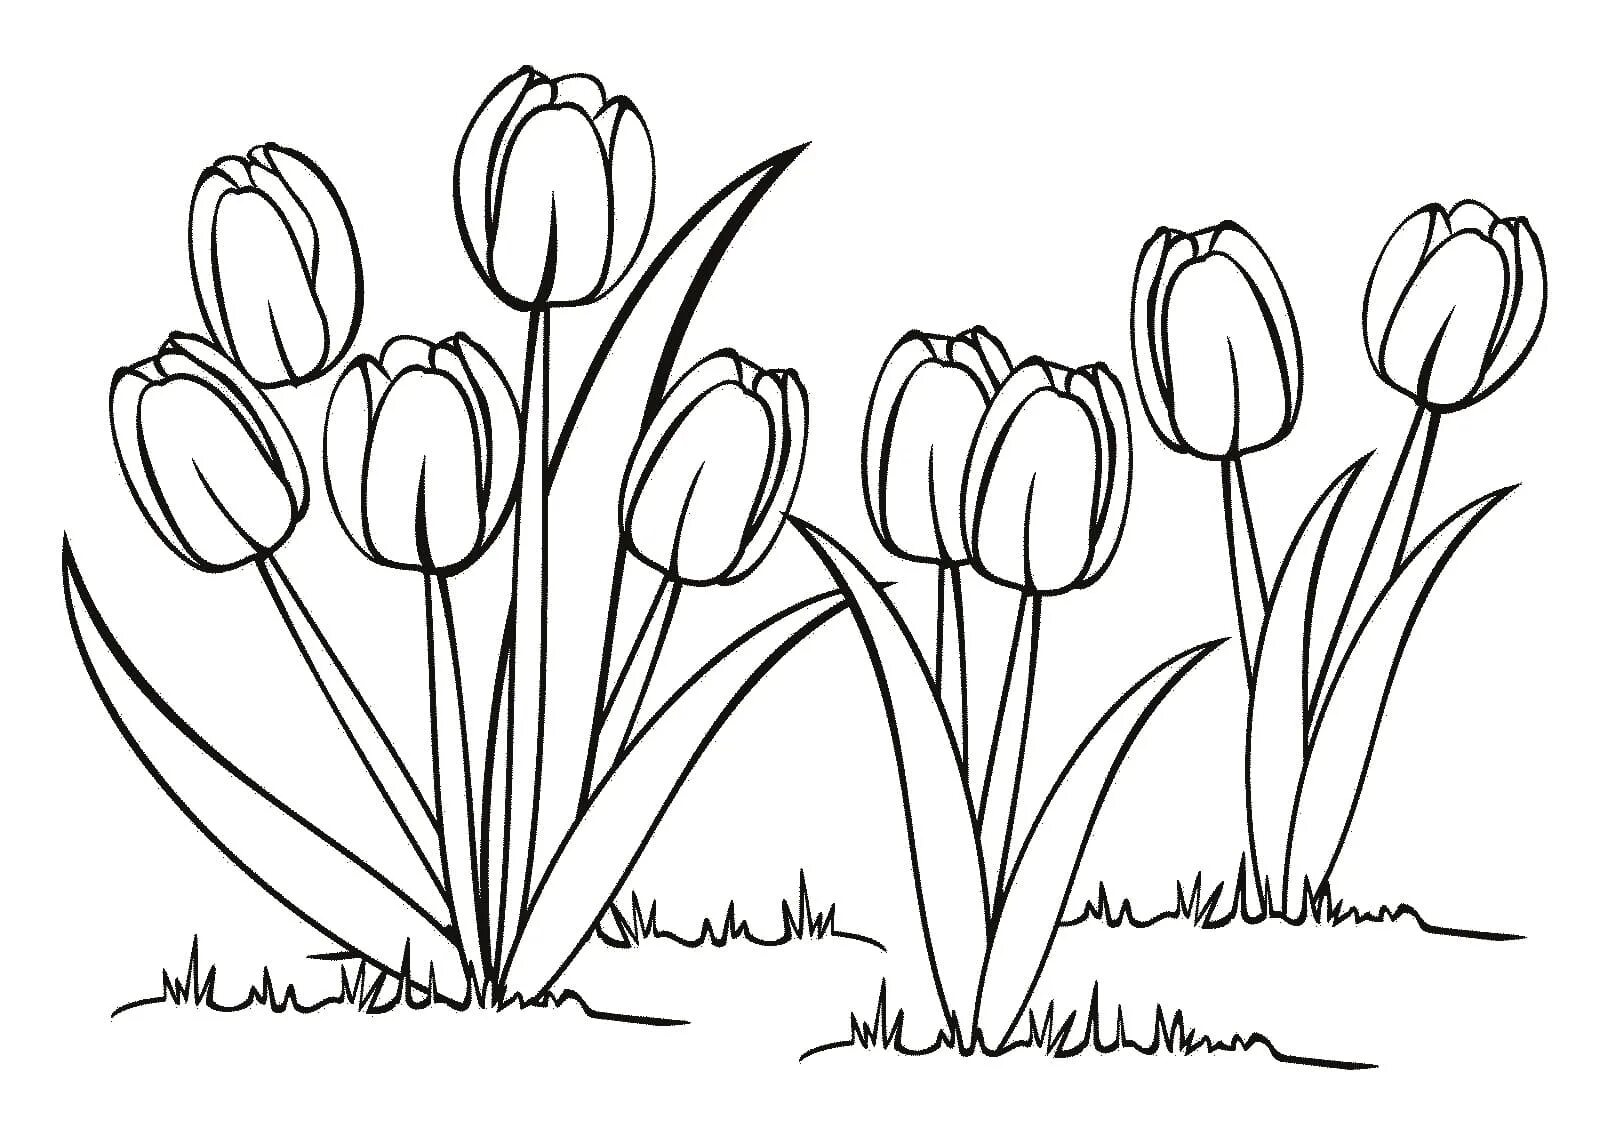 Coloring book shining tulips for children 5-6 years old